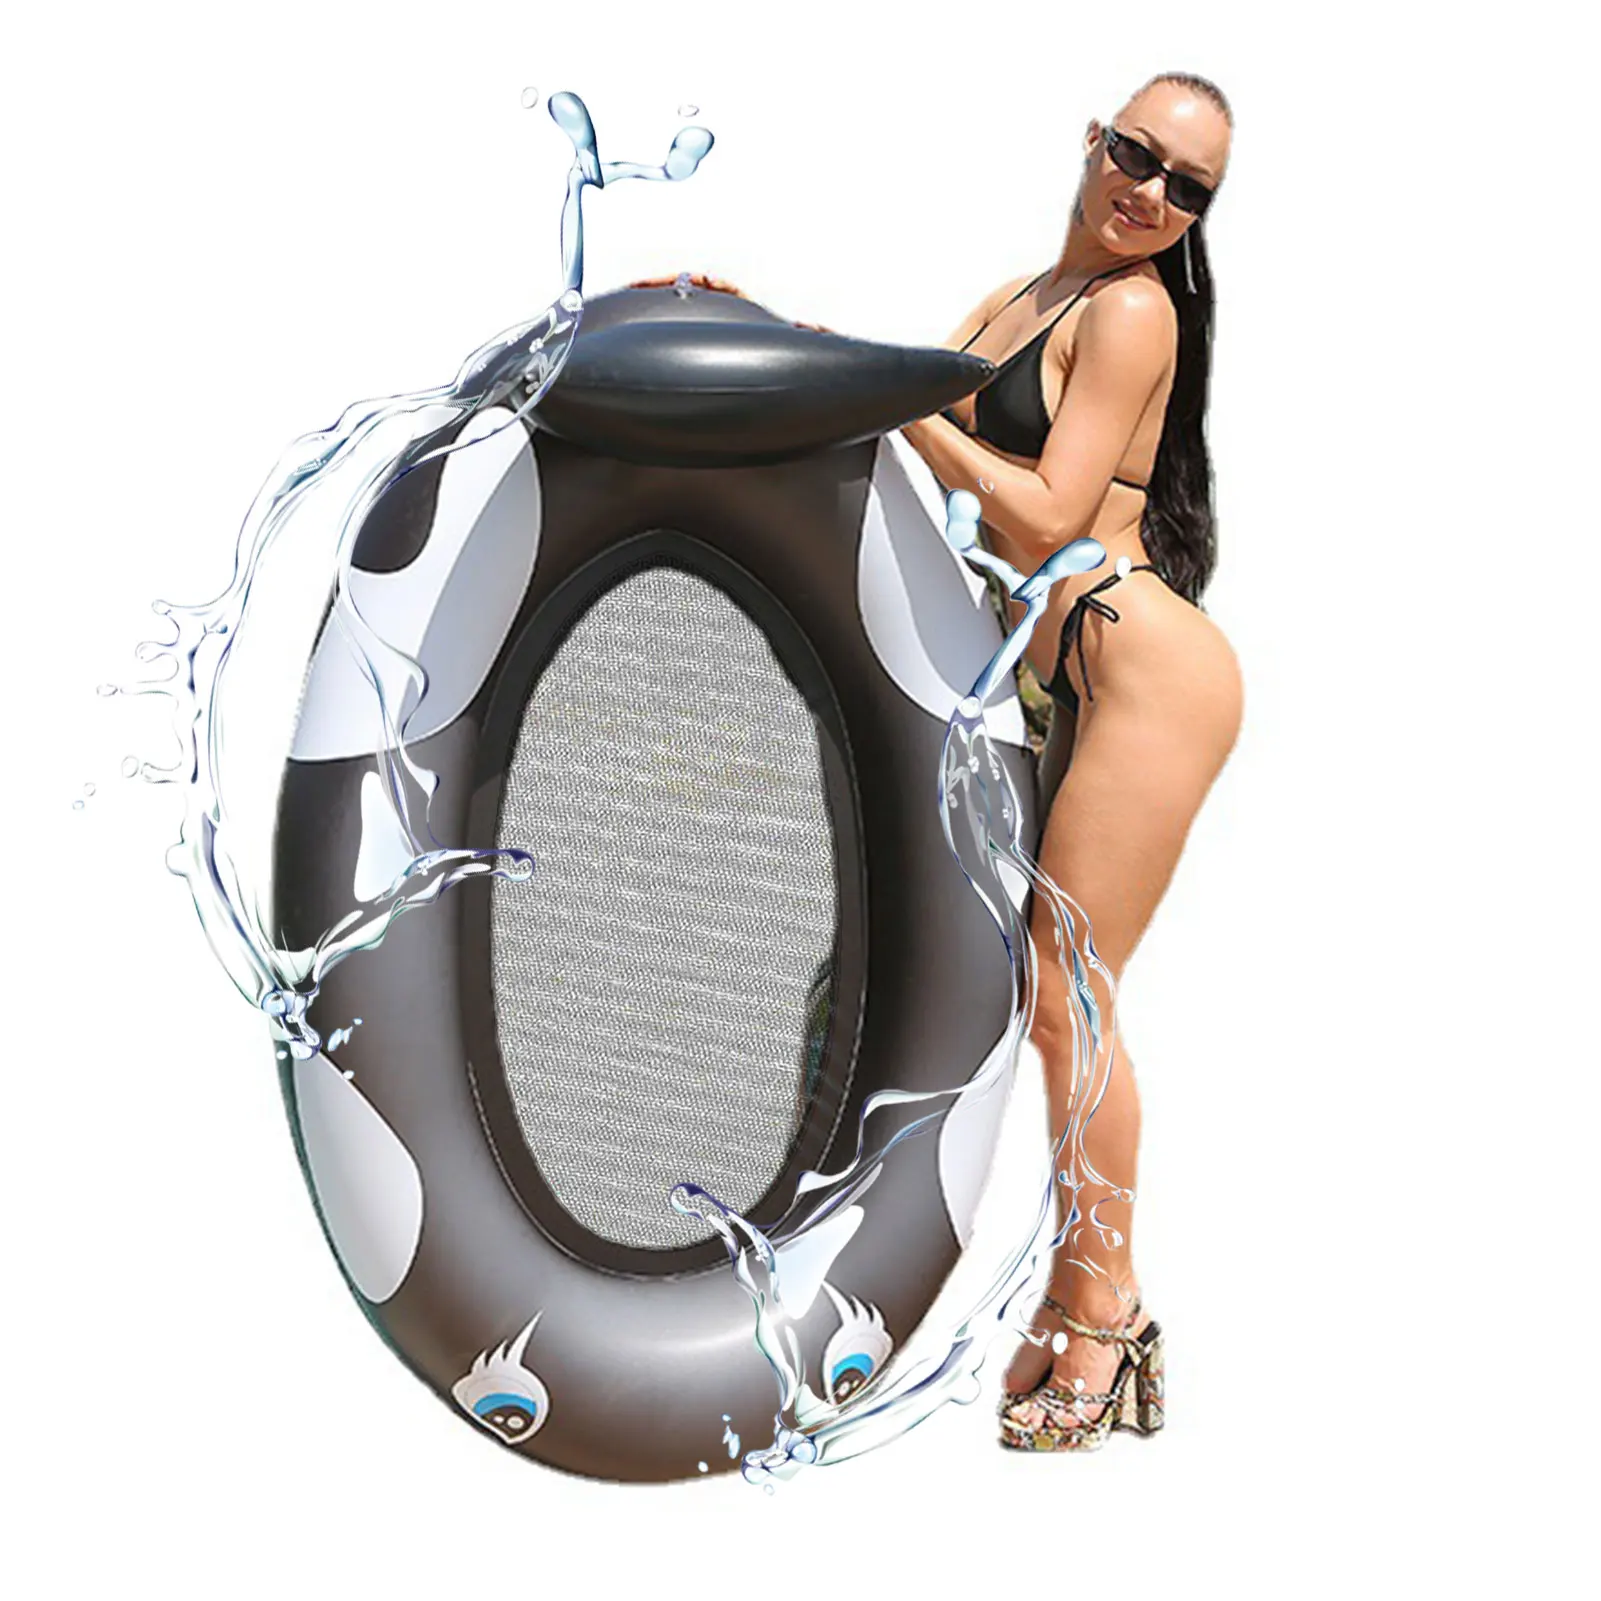 Summer Inflatable Foldable Floating Row Swimming Pool Water Hammock Air Mattresses Bed Beach Pool Toy Water Lounge Chair new swimming inflatable bed net hammock foldable water fun lounge chair floating bed sofa lazy water lounge chair summer